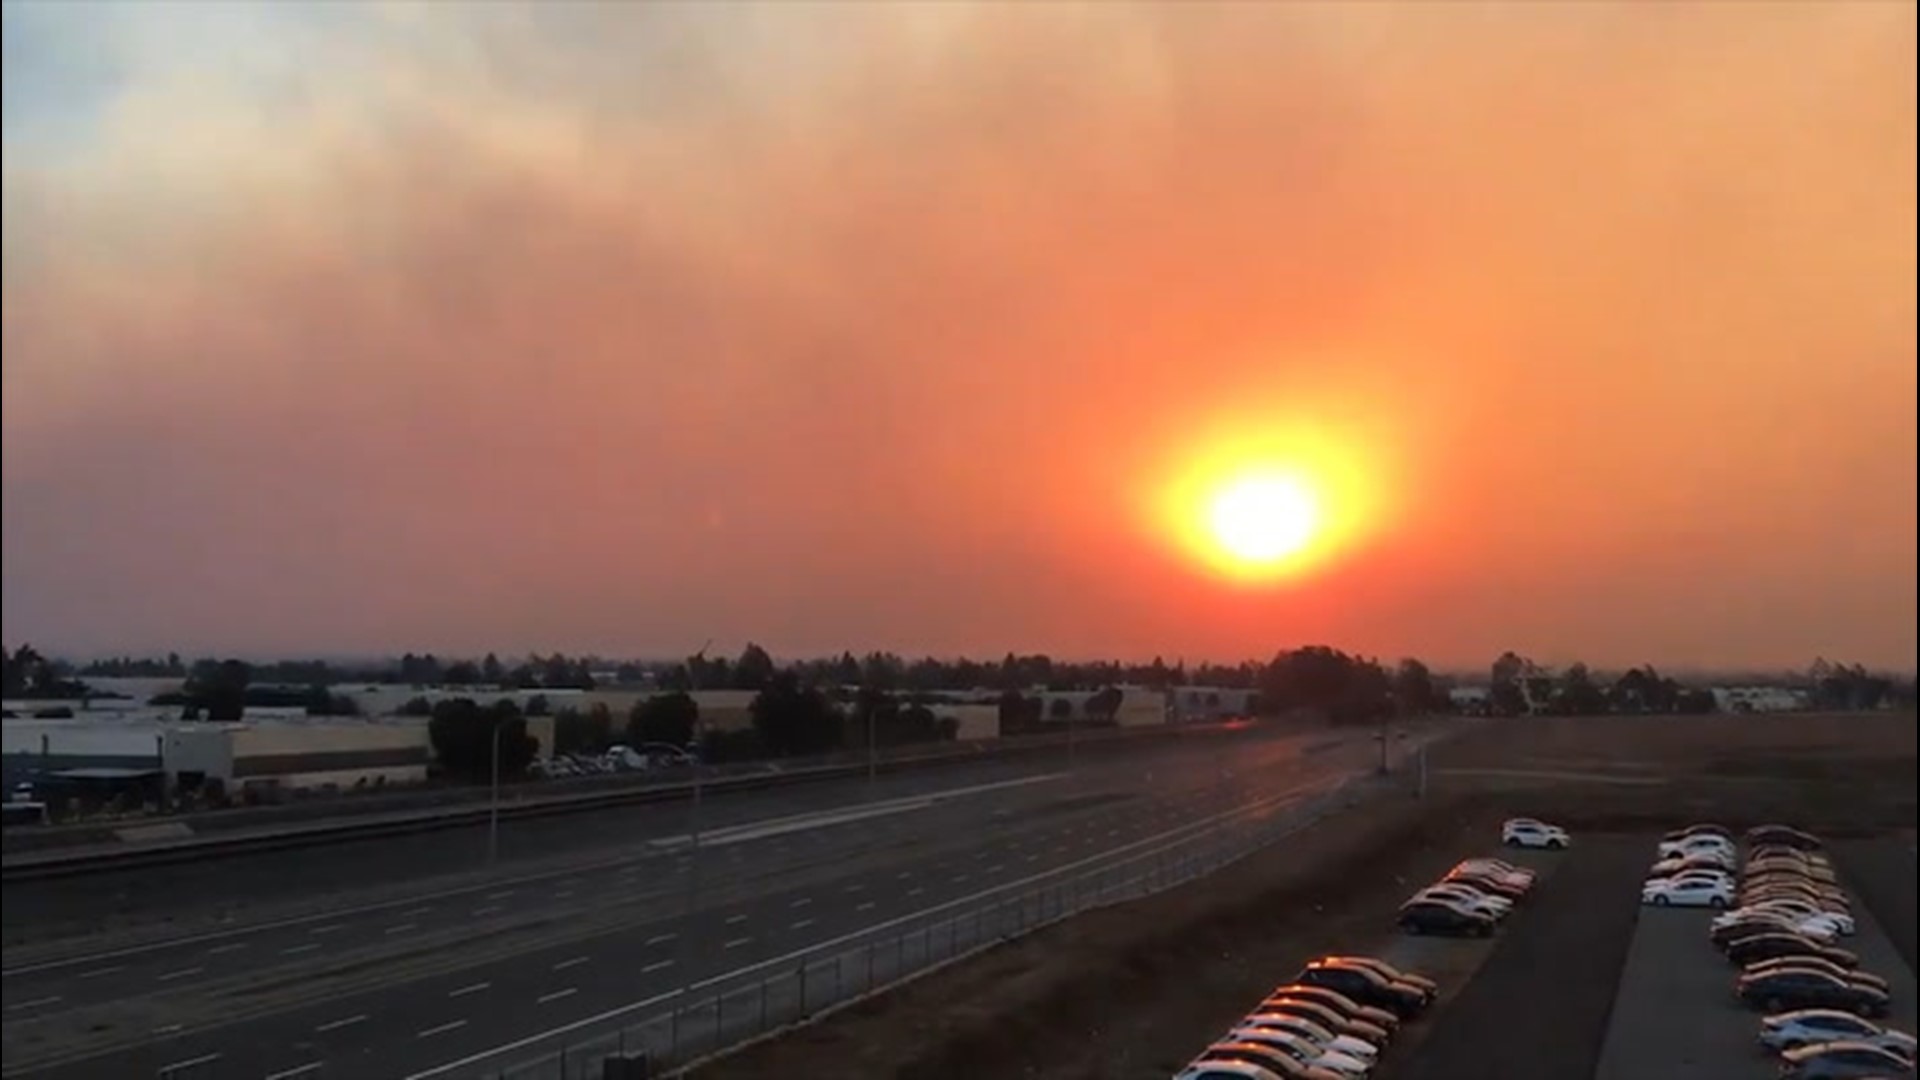 Video of a sunrise in Tustin, California, on Dec. 3, shows smoke from the Bond Fire in Orange County obscuring the sun before panning over to show the Airport Fire in Riverside County in the other direction.